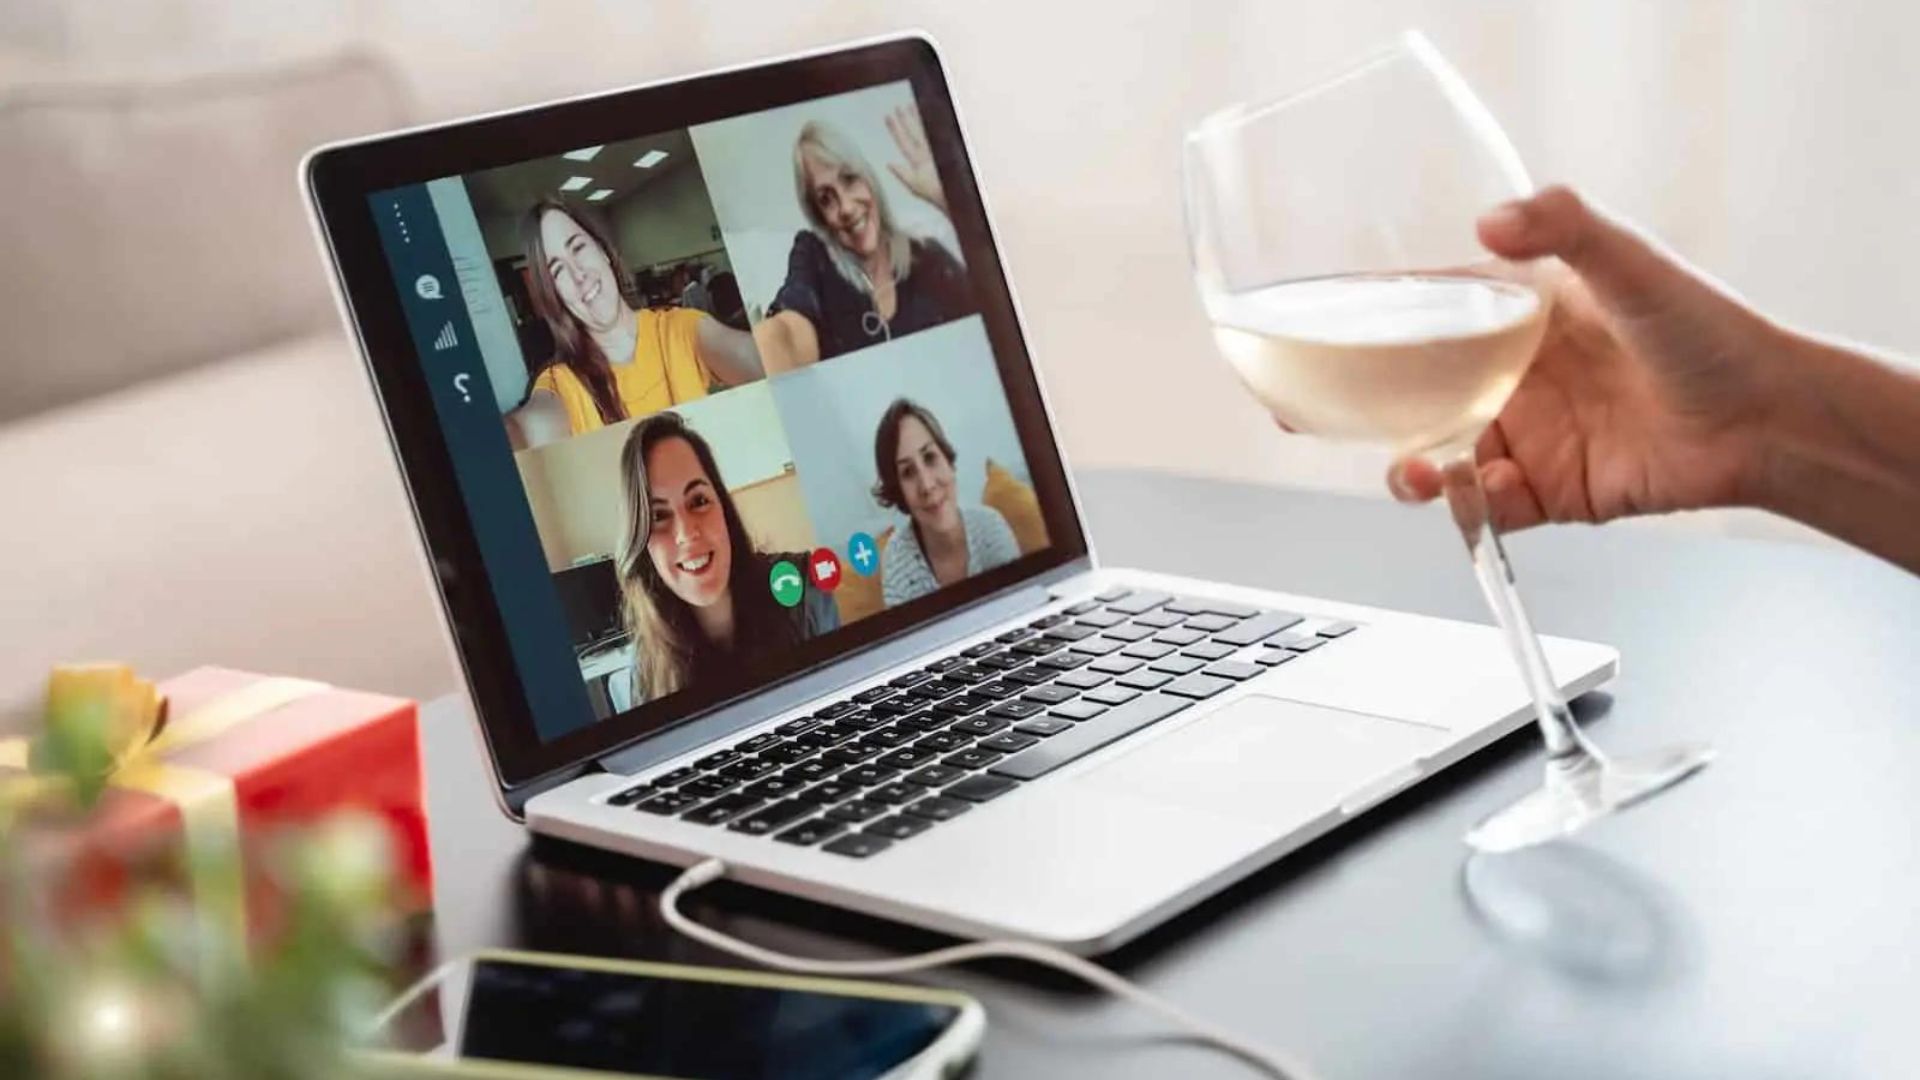 a hand holding a glass of wine and a laptop in the front following virtual partying 